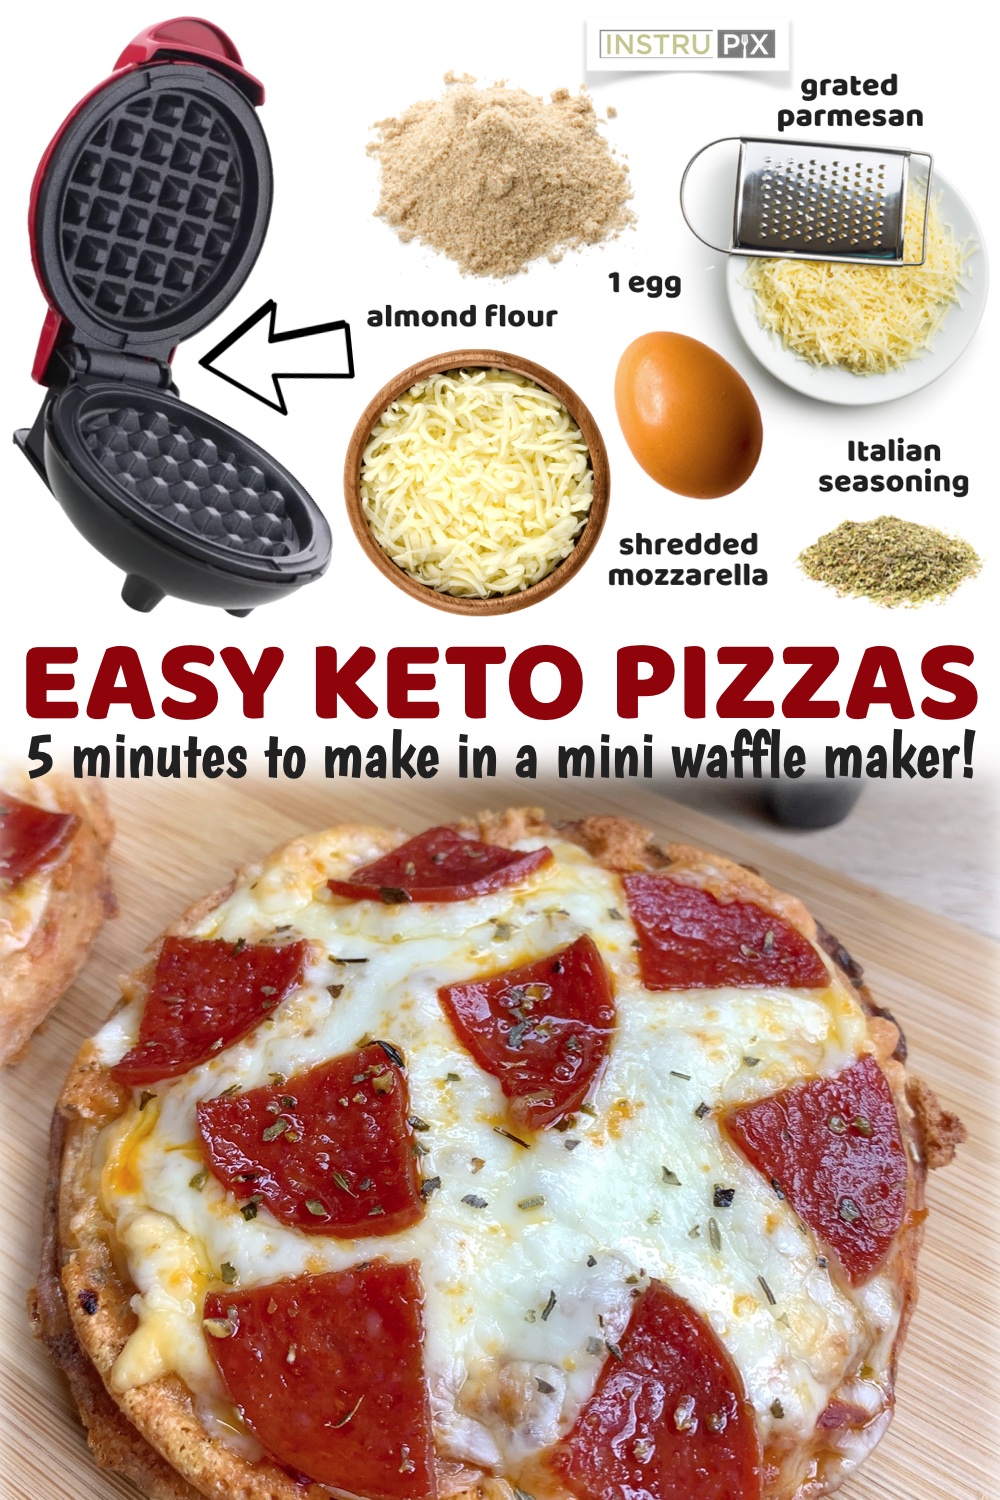 Quick and easy mini keto pizzas made with just a few ingredients! Almond flour, egg, mozzarella cheese, parmesan and seasoning. Insanely crispy and delicious! This is seriously the best last minute keto dinner or even quick lunch to make. You've got to have a mini waffle maker! A total game changer. 